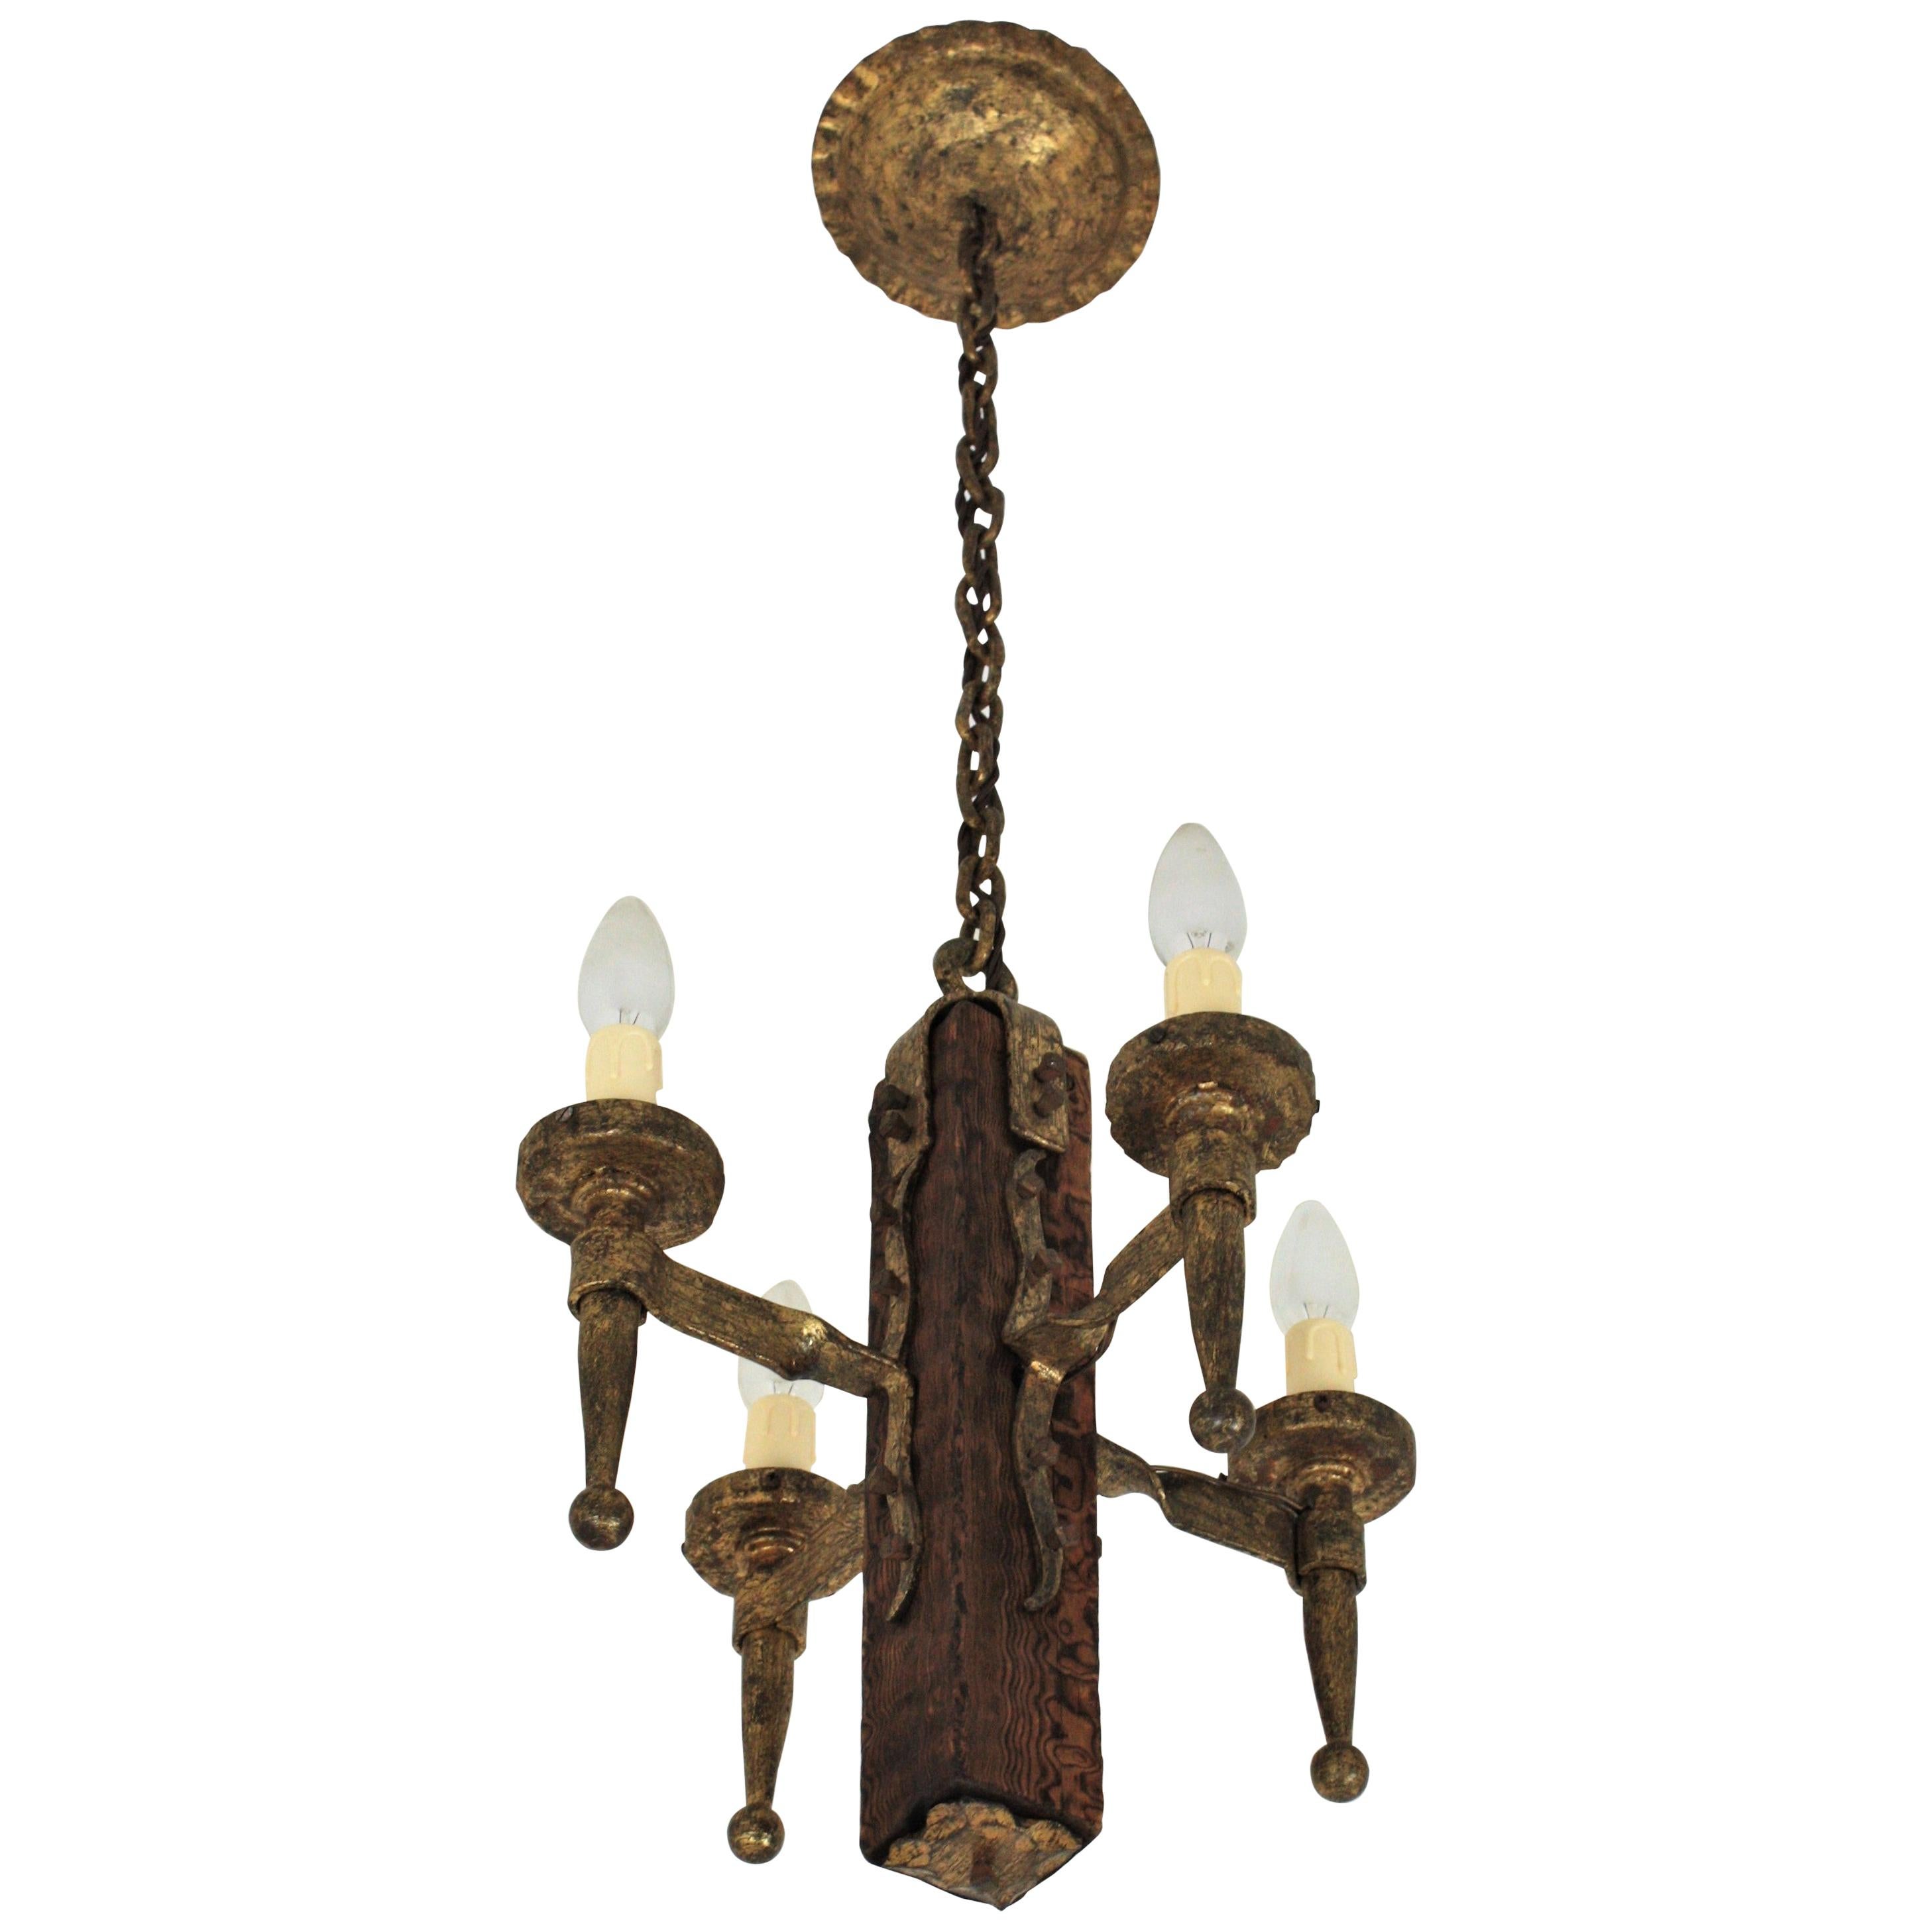 Spanish Gothic Style Chandelier in Gilt Wrought Iron and Wood with Nail Details